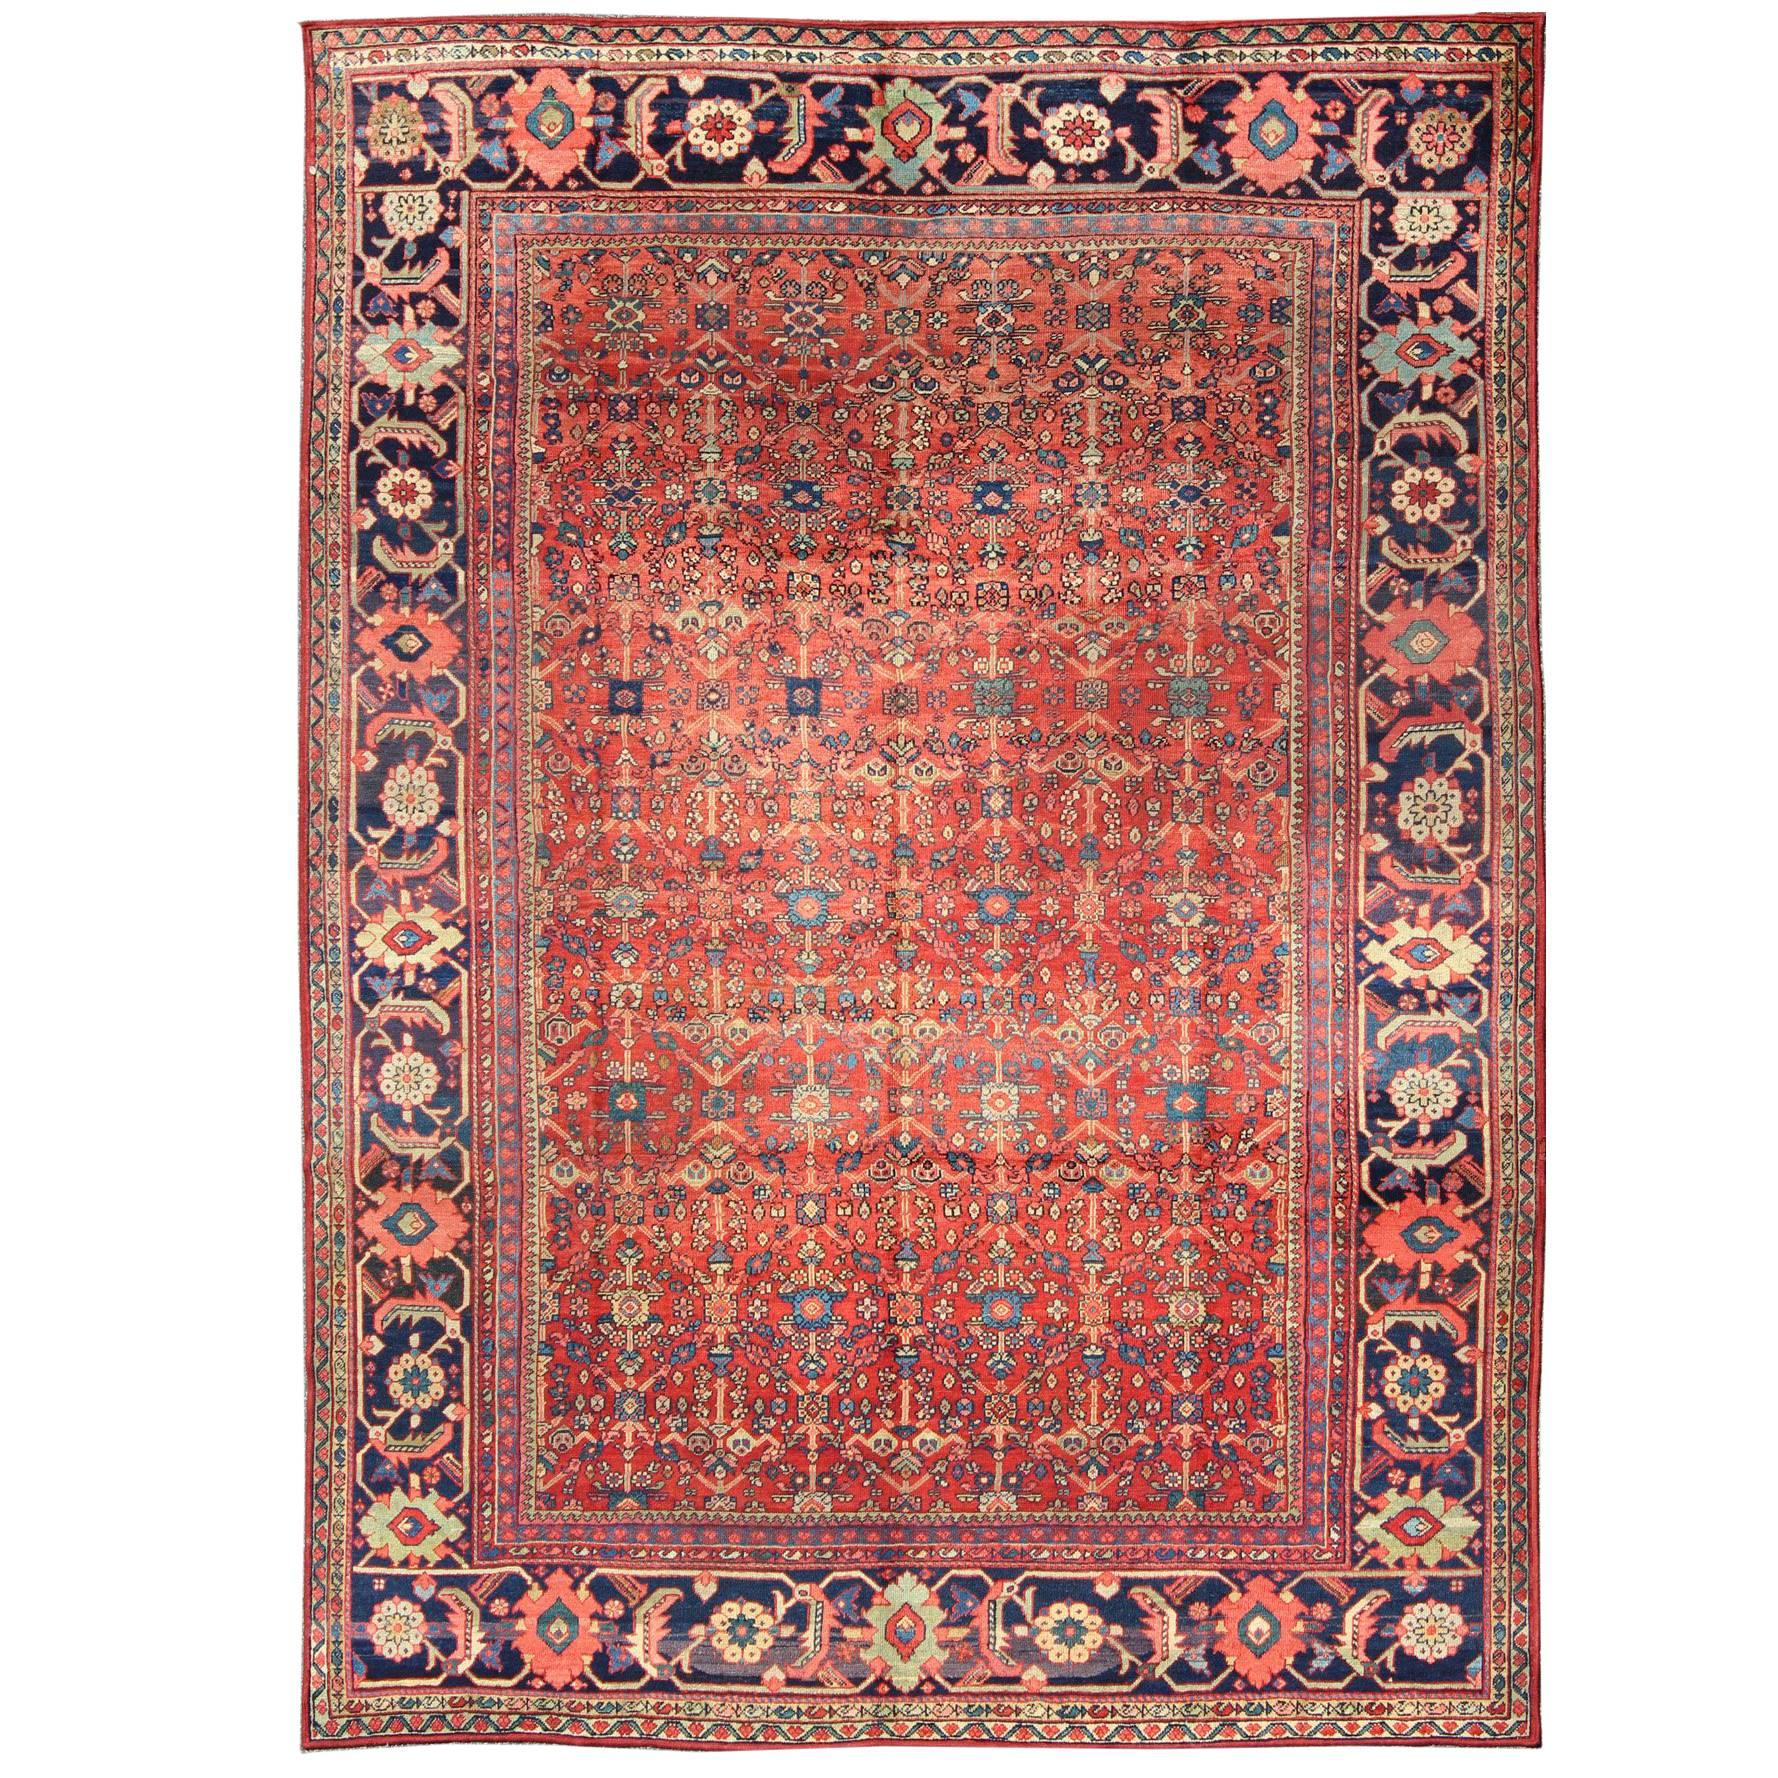 Antique Sultanabad Rug with All Over Geometric Design in Red, Blue, Green